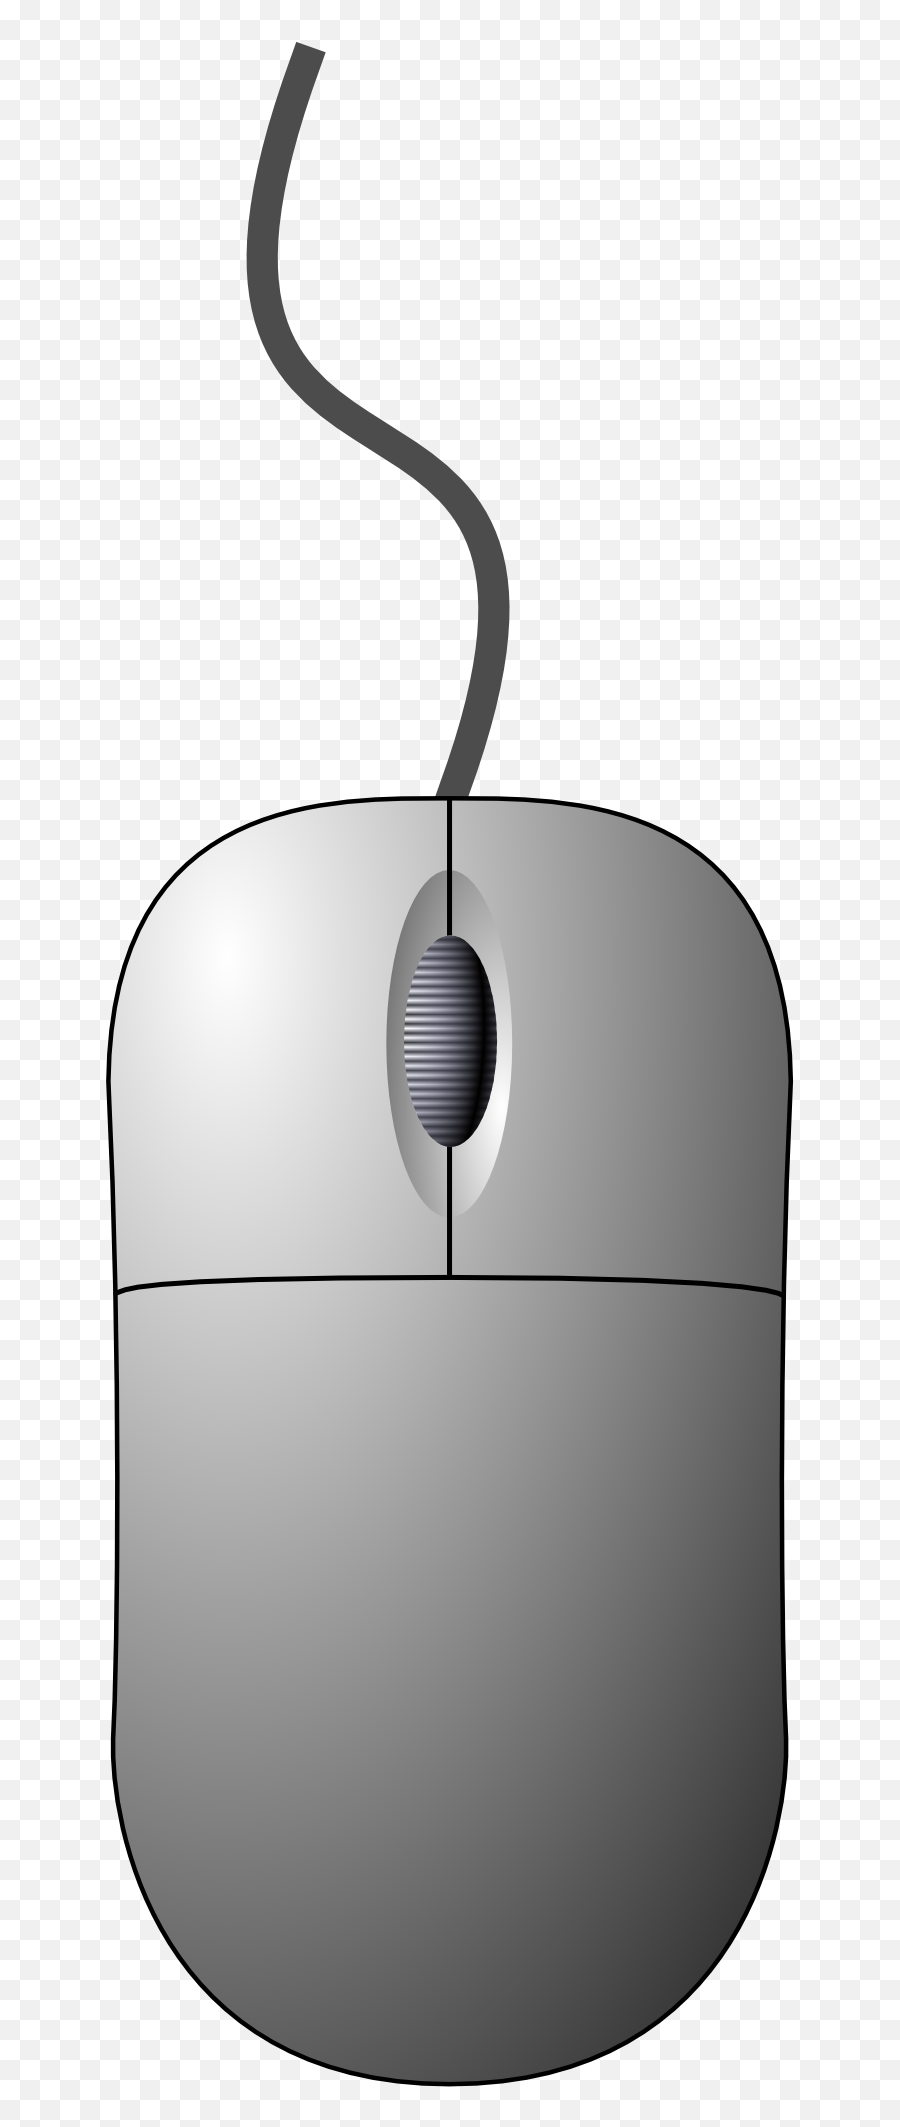 Images Of A Computer Mouse - Computer Hardware Emoji,Computer Mouse Clipart